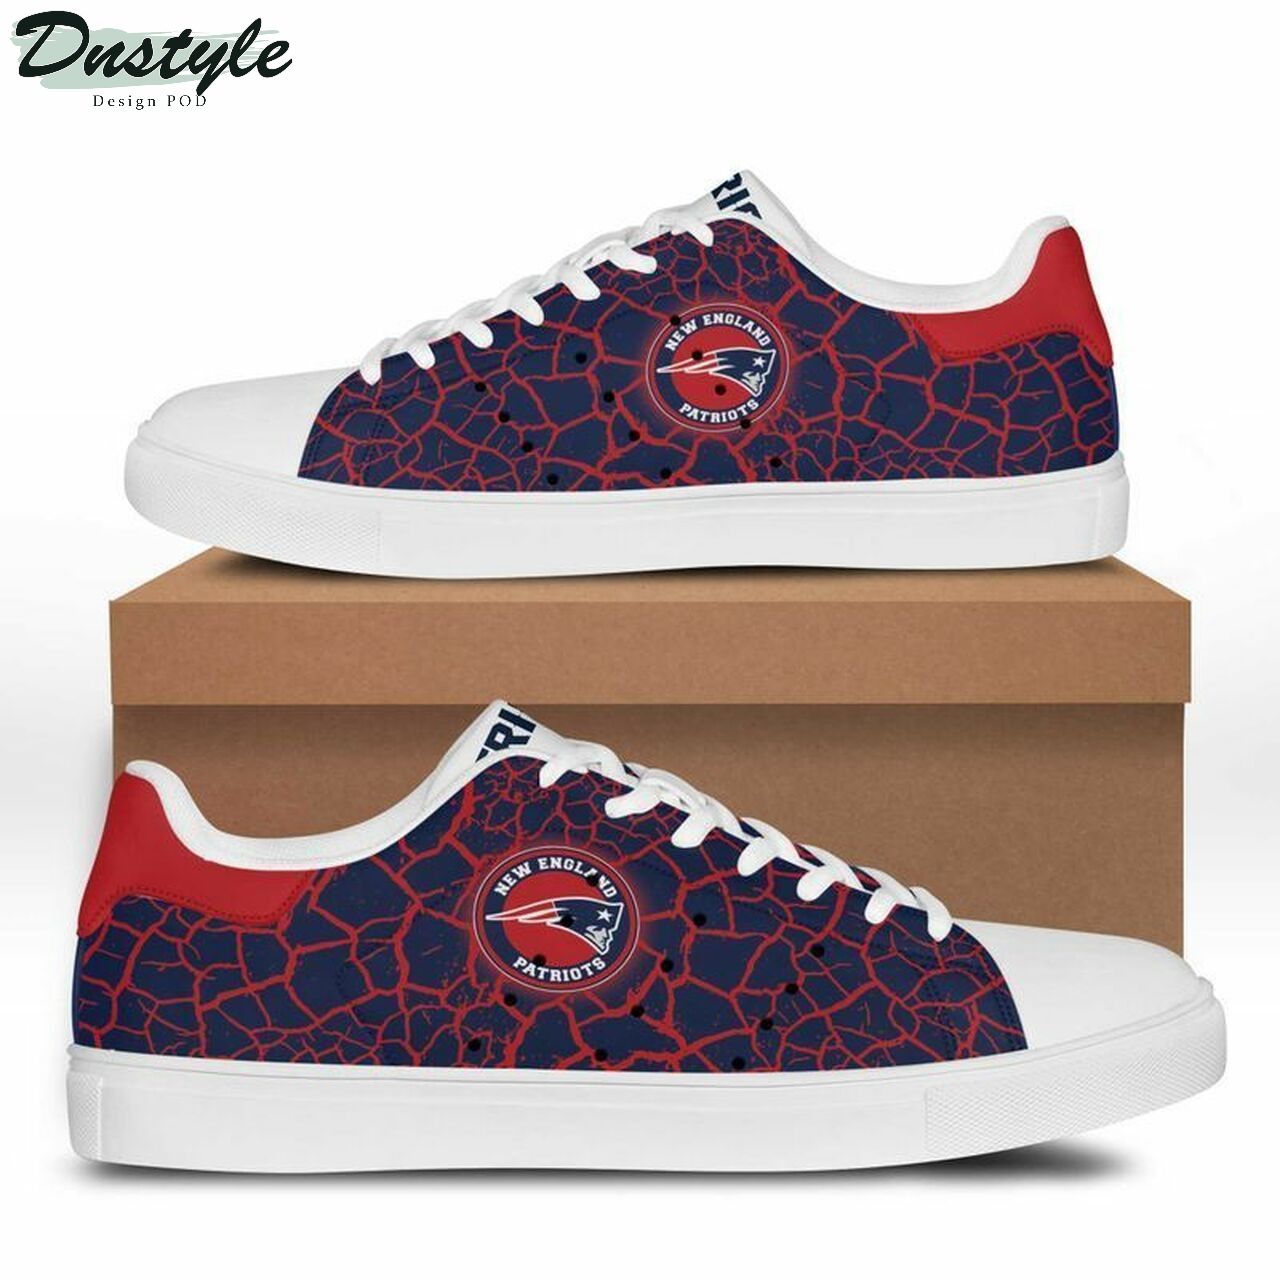 NFL New England Patriots stan smith low top skate shoes